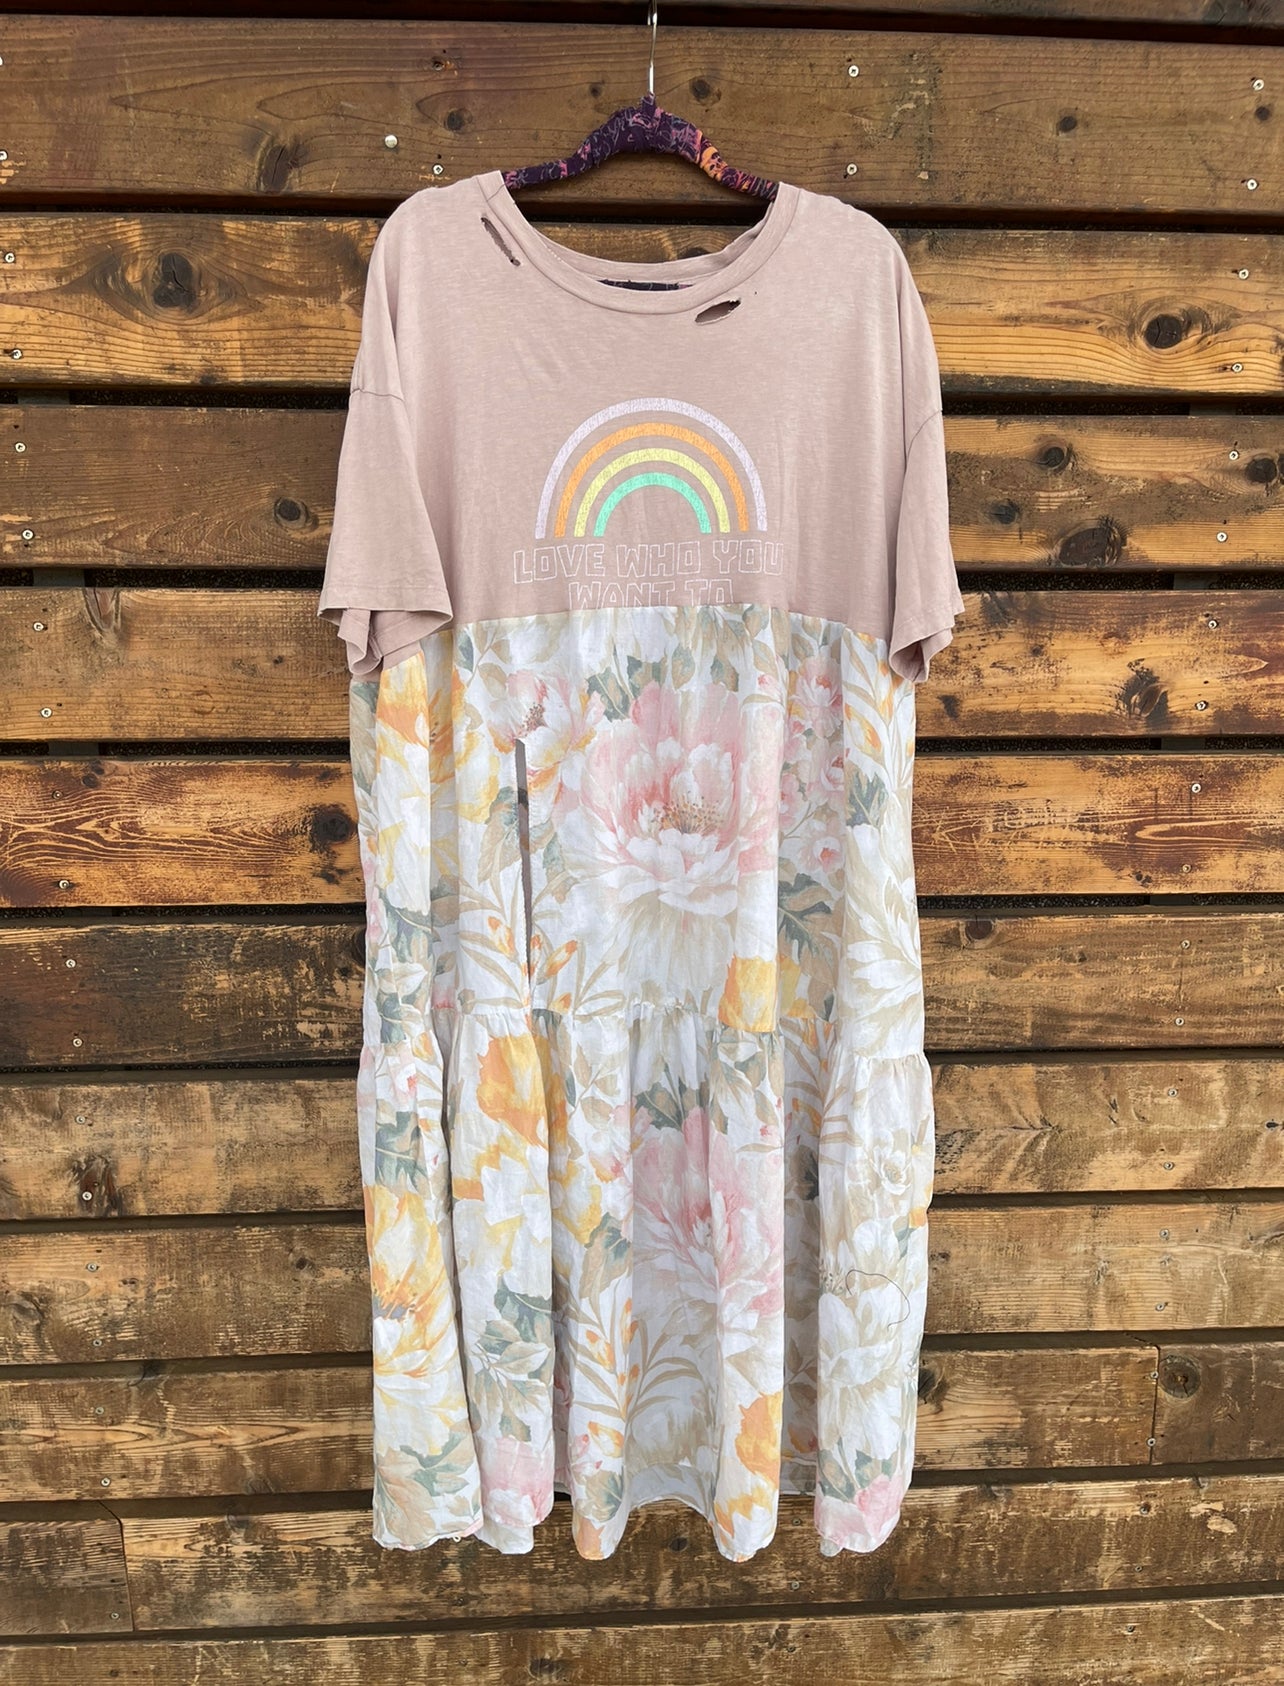 Love Who You Want To Maxi Tee